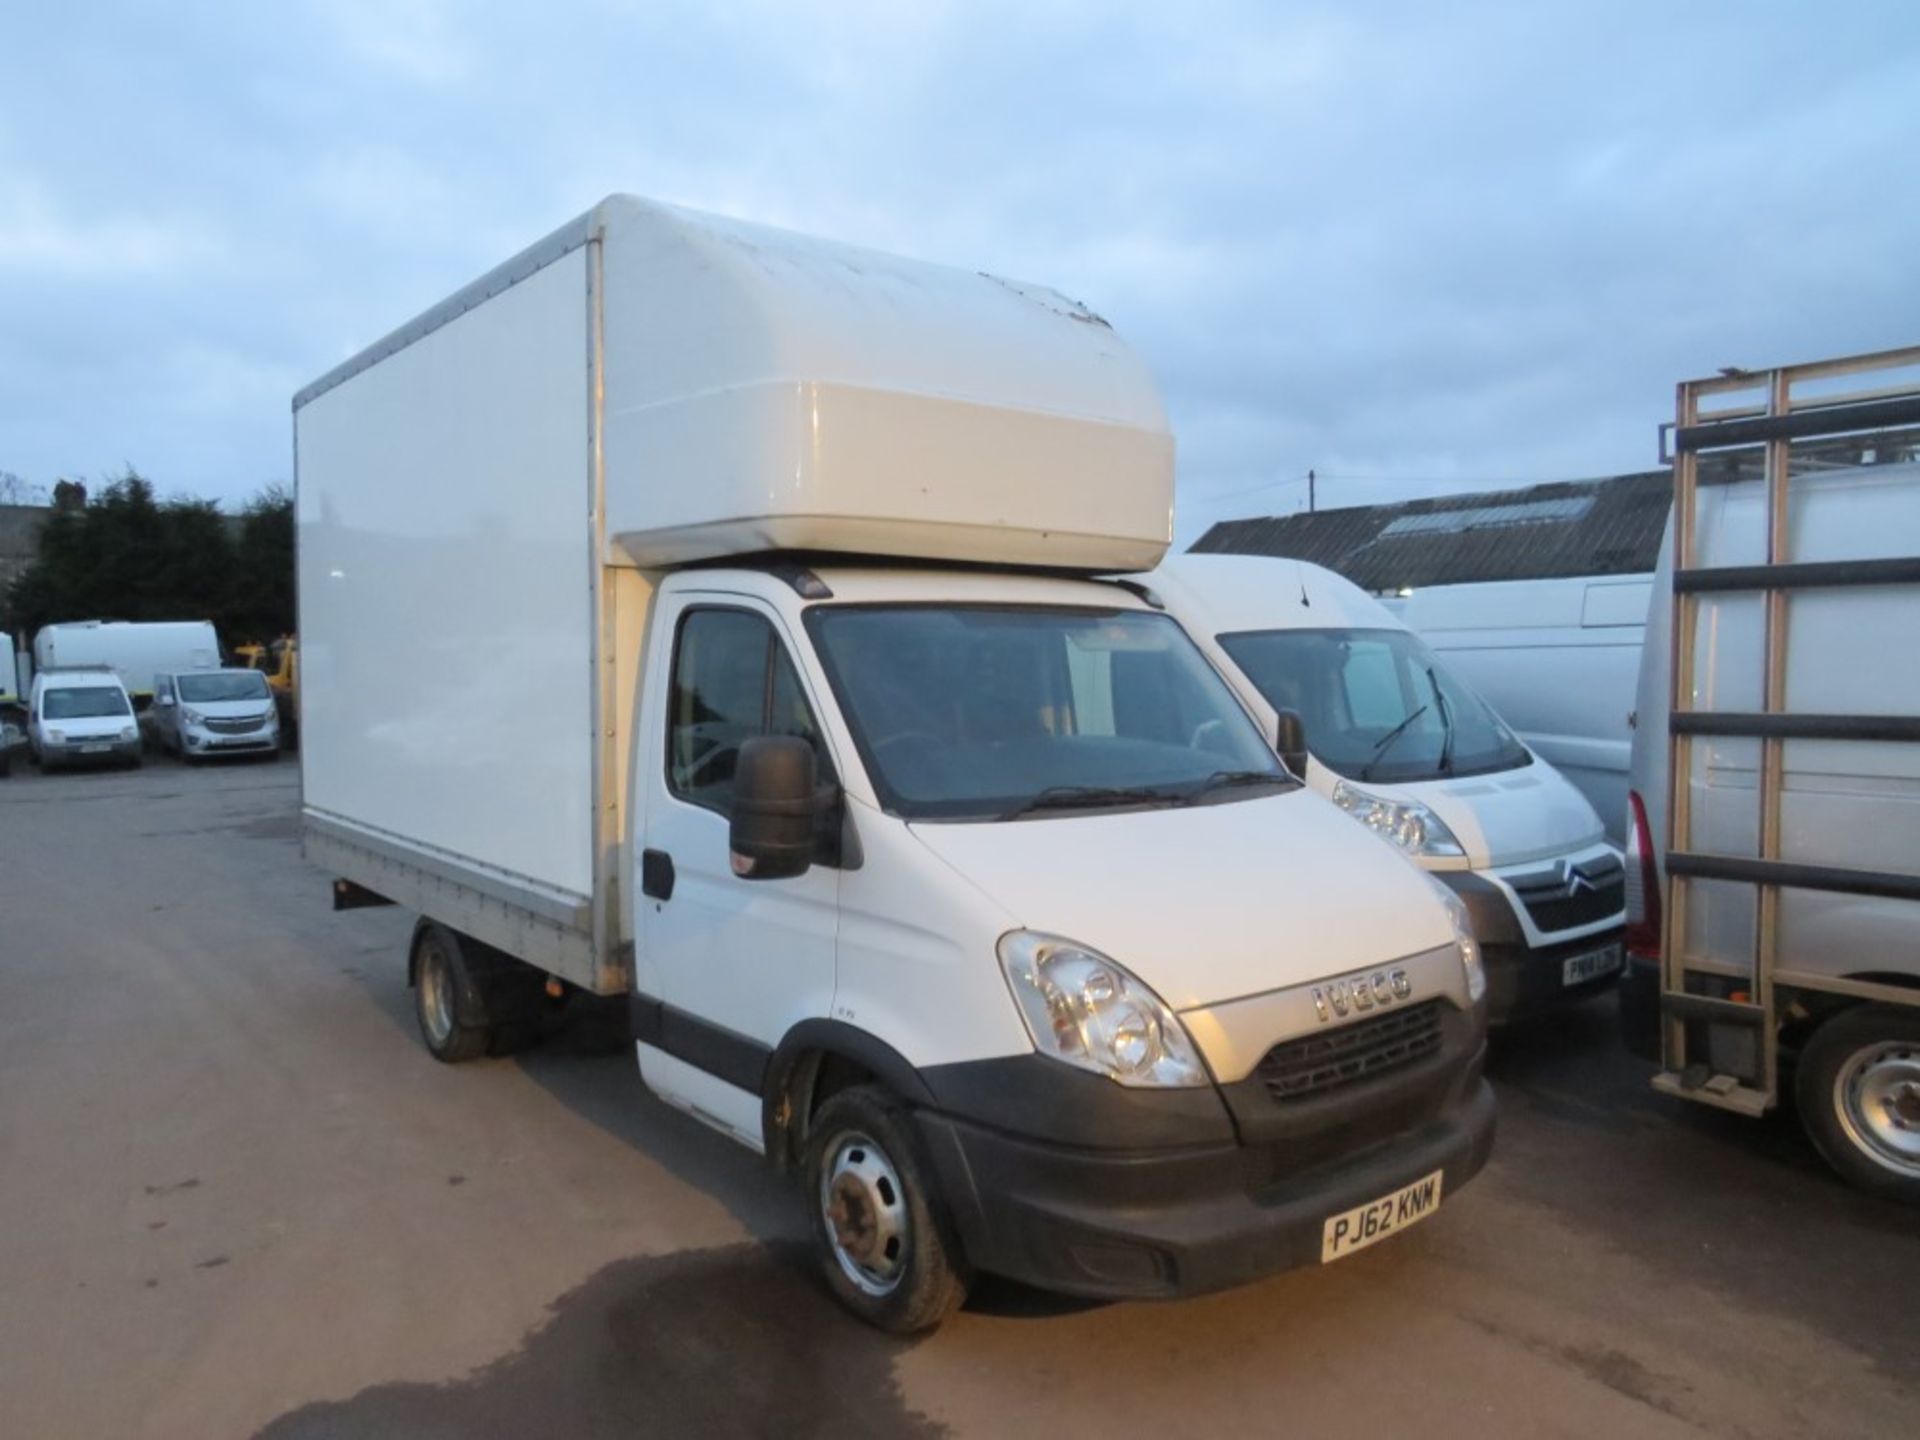 62 reg IVECO DAILY 35C13 MWB, 1ST REG 01/13, 177762M WARRANTED, V5 HERE, 1 OWNER FROM NEW [+ VAT]